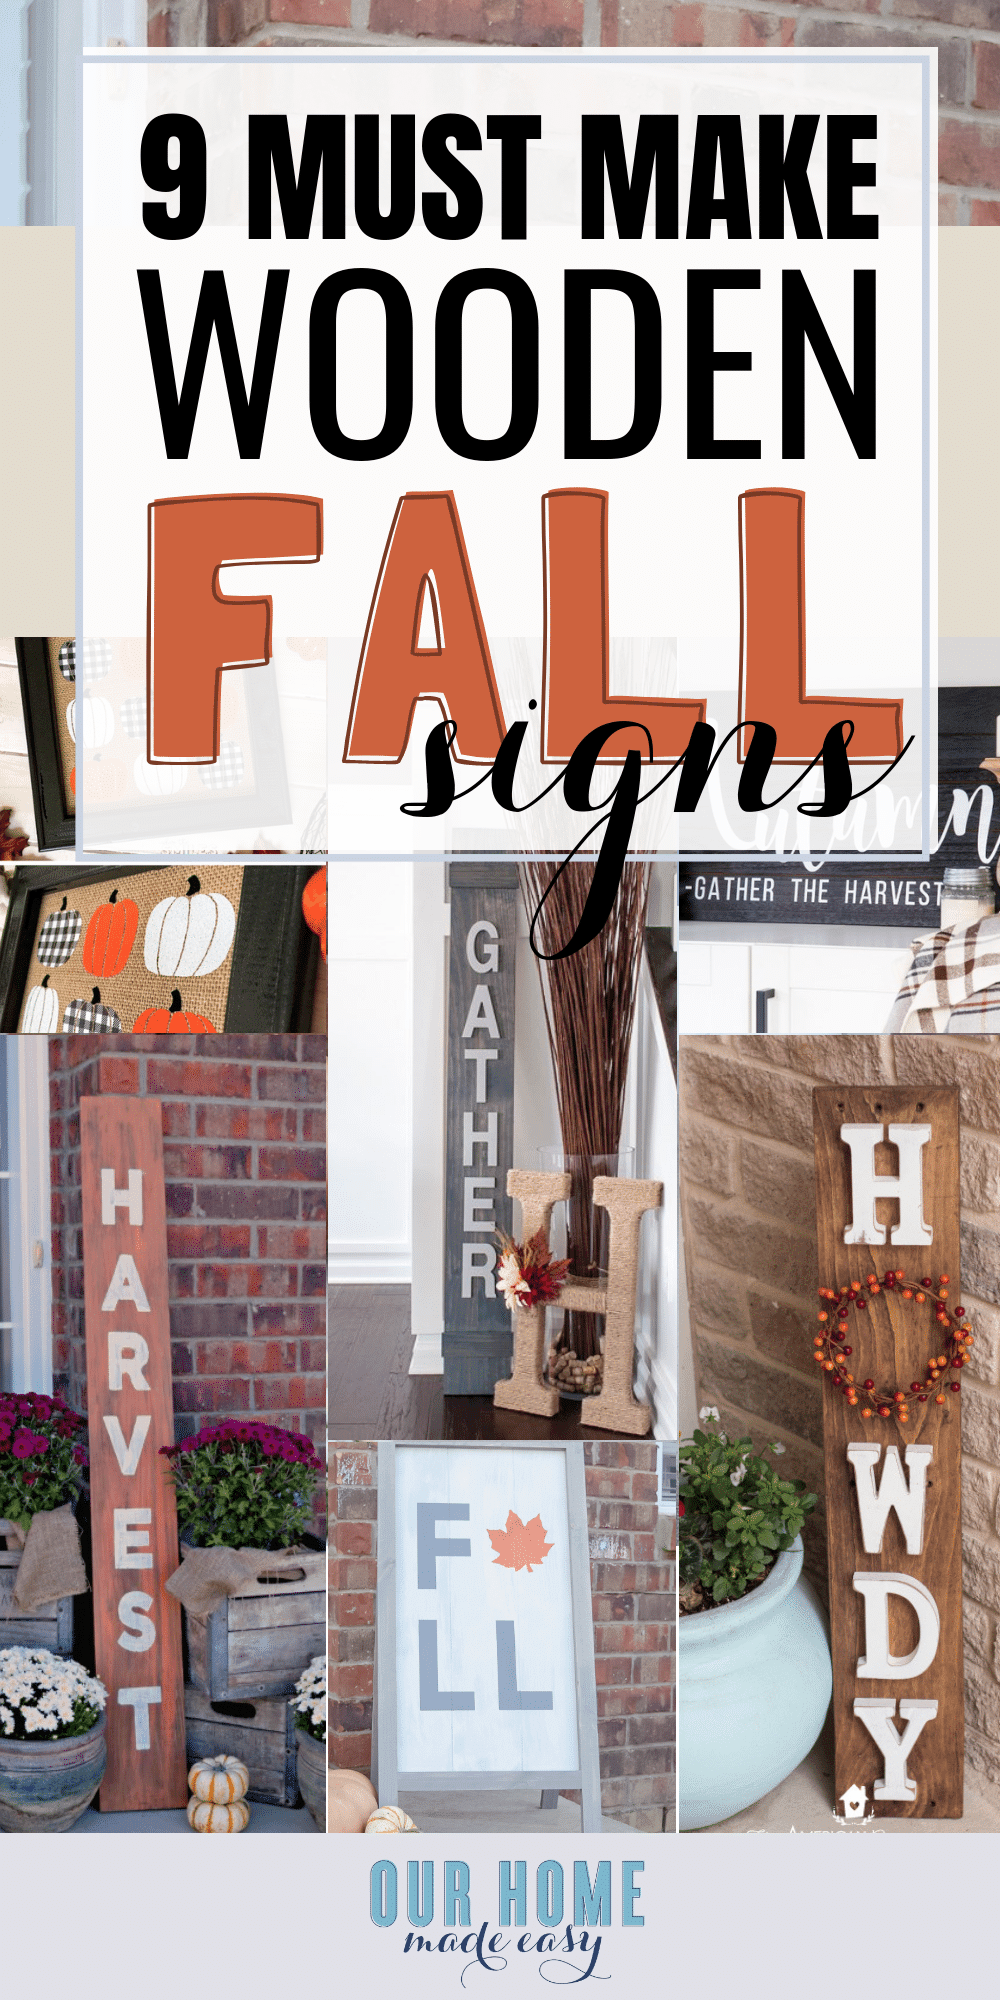 Make one of these easy DIY fall wood signs this weekend! Not only are they adorable, but they are the best way to add fall decor on a budget! Click to see them! #DIY #DIYHomeDecor #farmhousestyle